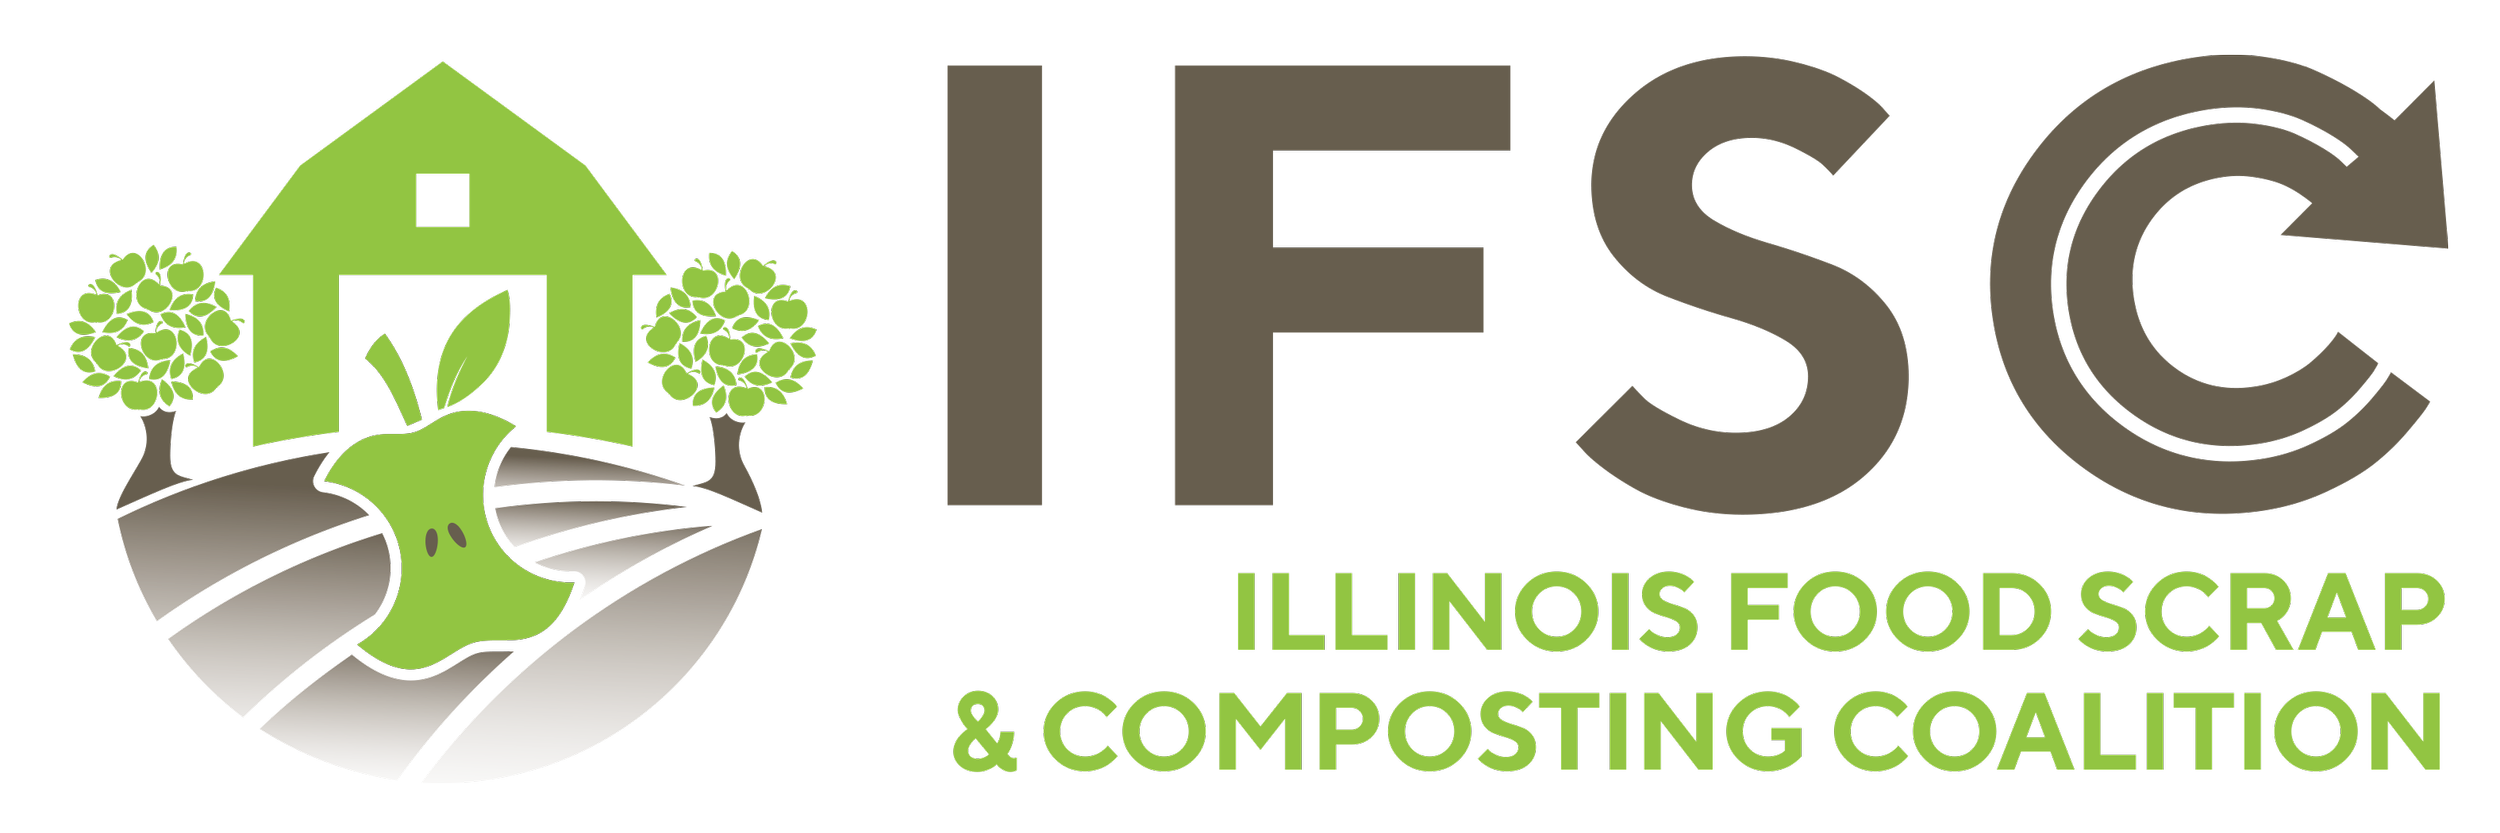 illinois food scrap and composting coalition